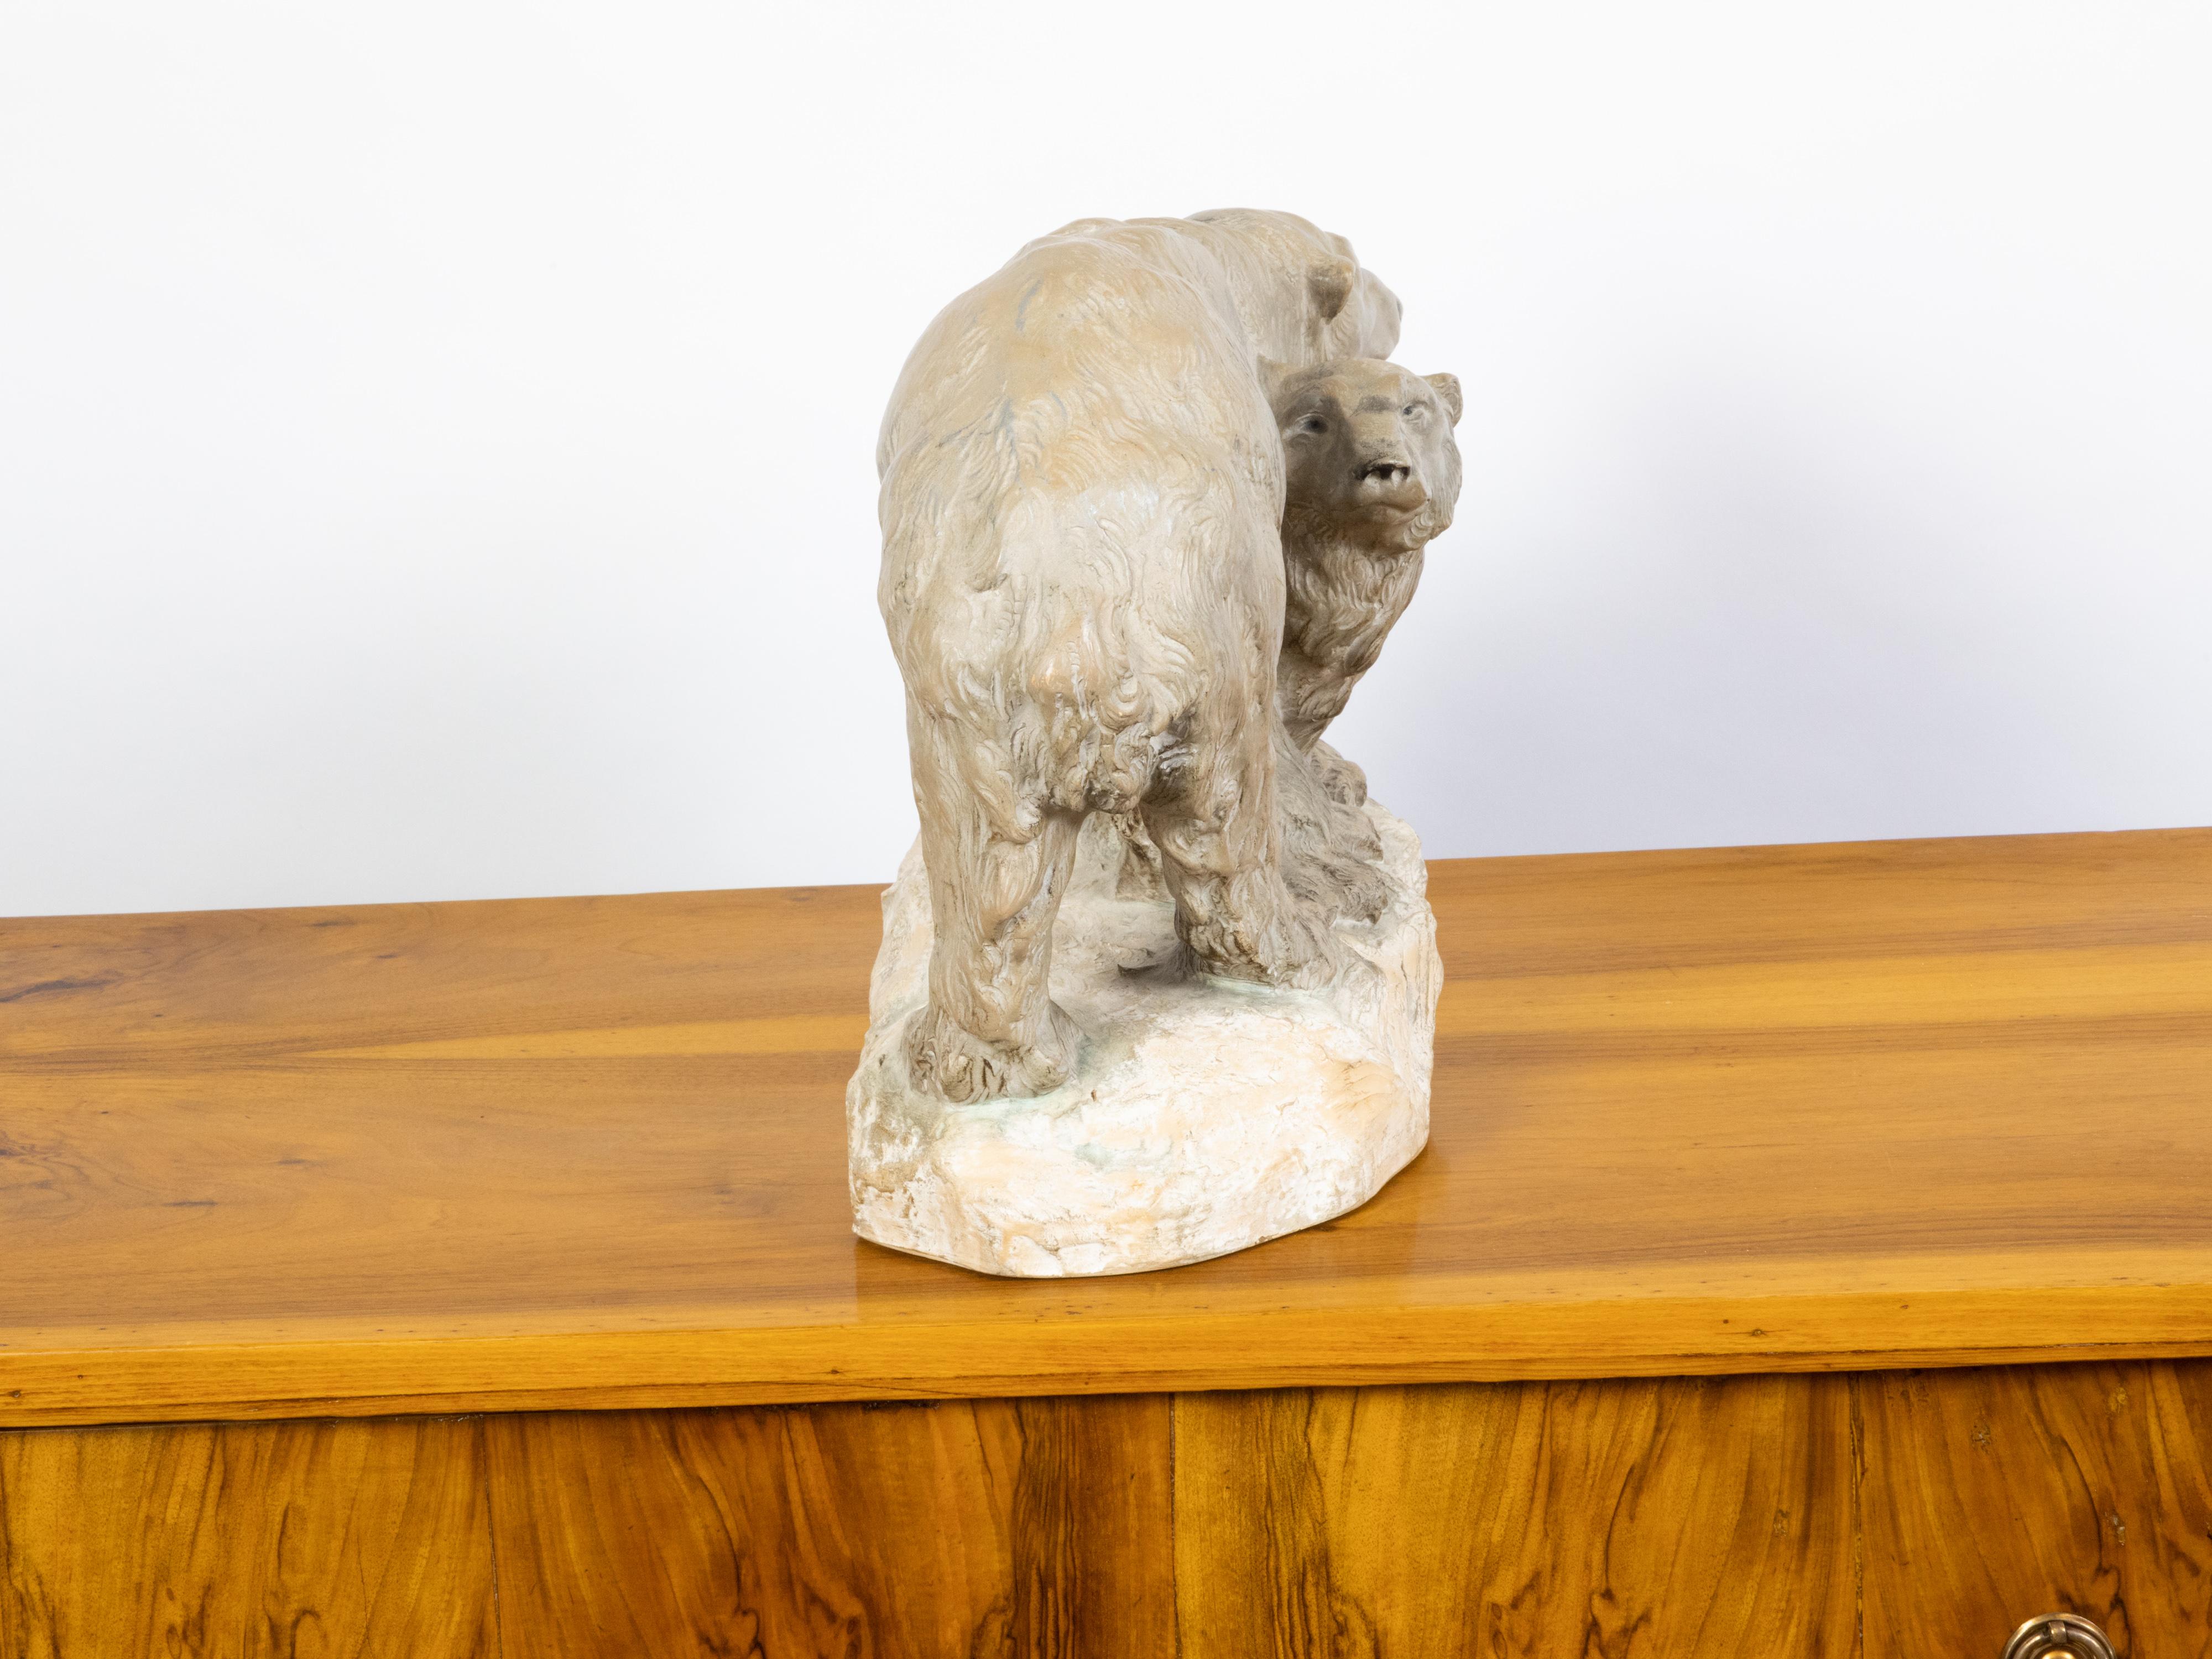 Continental Midcentury Terracotta Sculpture Depicting Two Bears on a Base For Sale 1